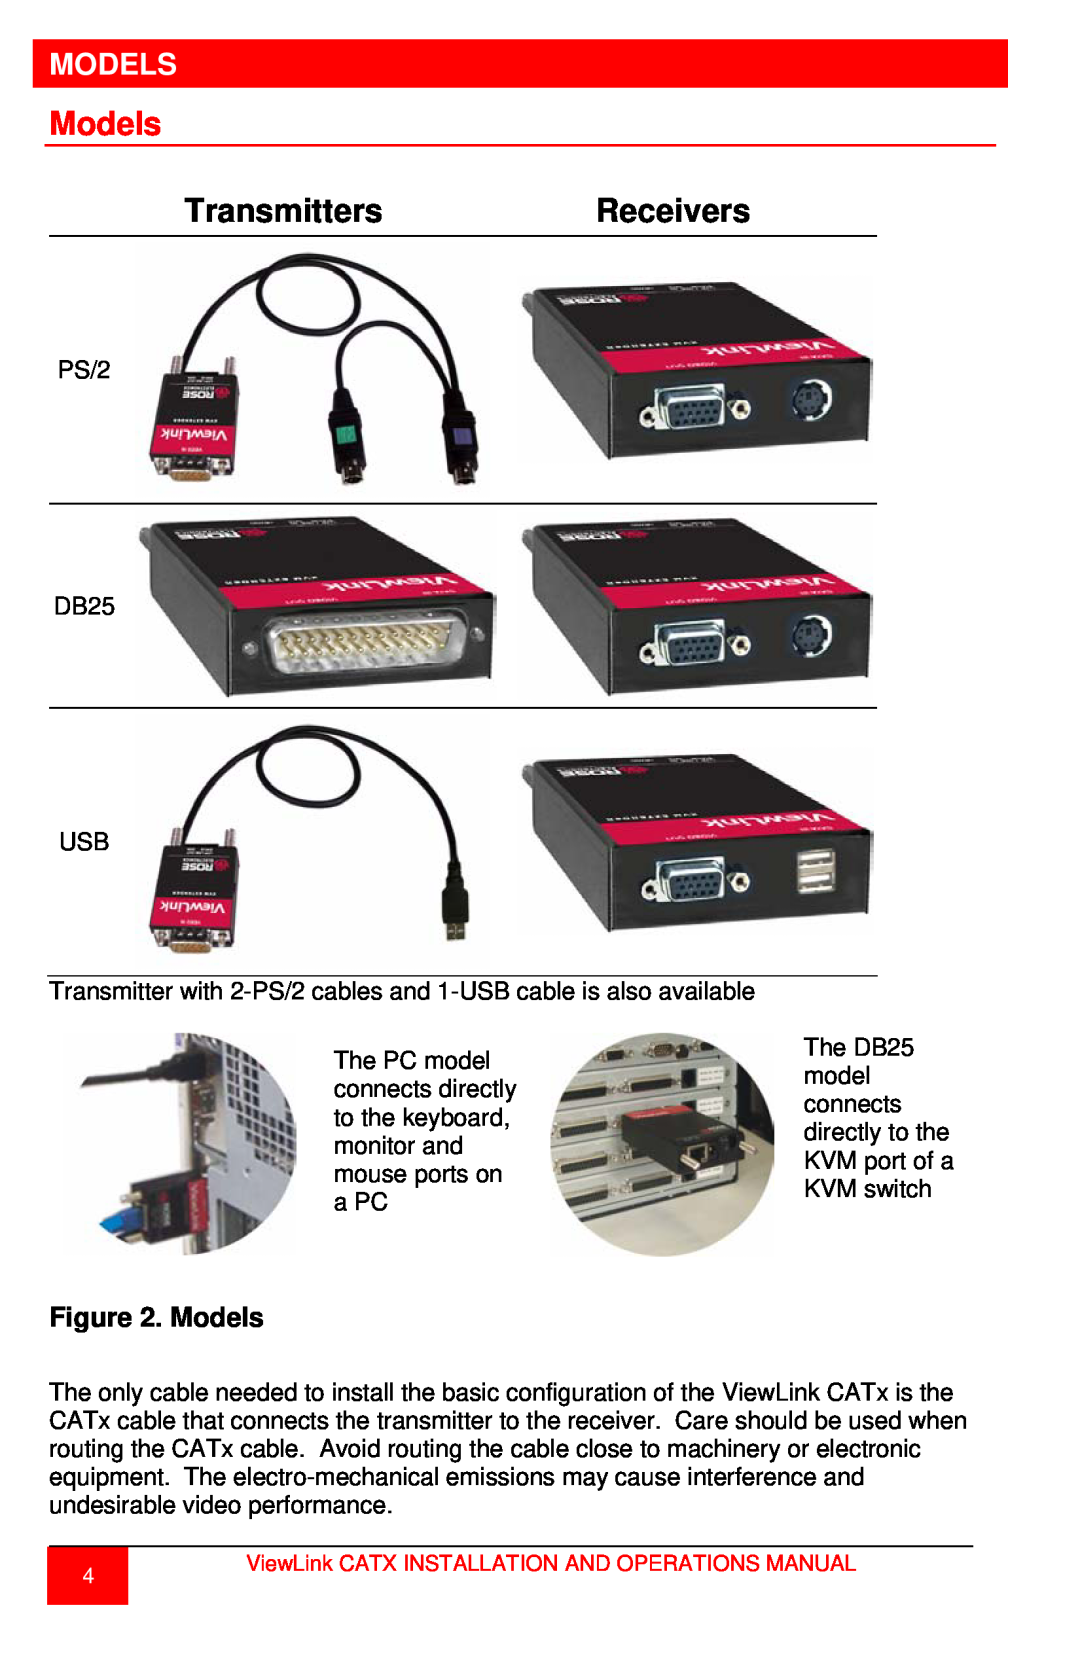 Rose electronic CATx manual Models, TransmittersReceivers 